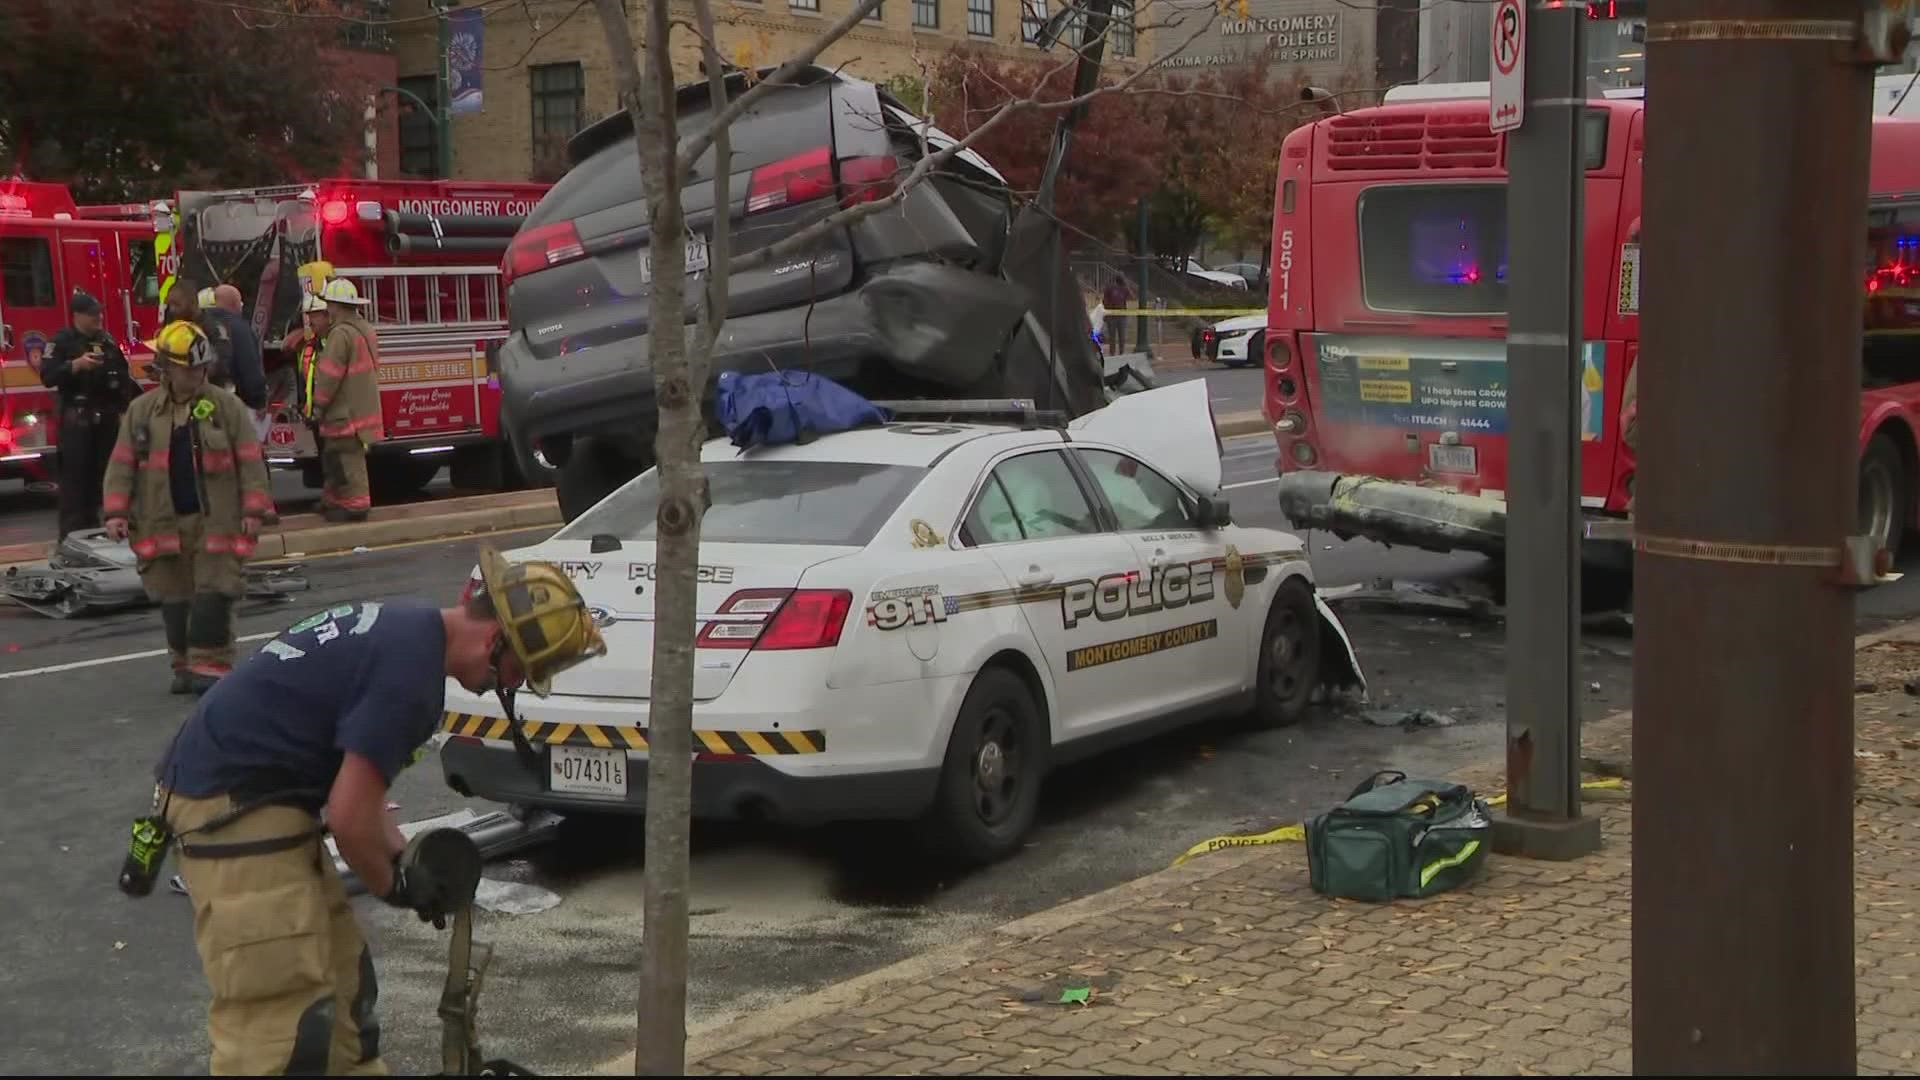 Three men are facing multiple charges after they crashed a van into the back of a Metro bus during a police chase Monday afternoon in Silver Spring, Maryland.